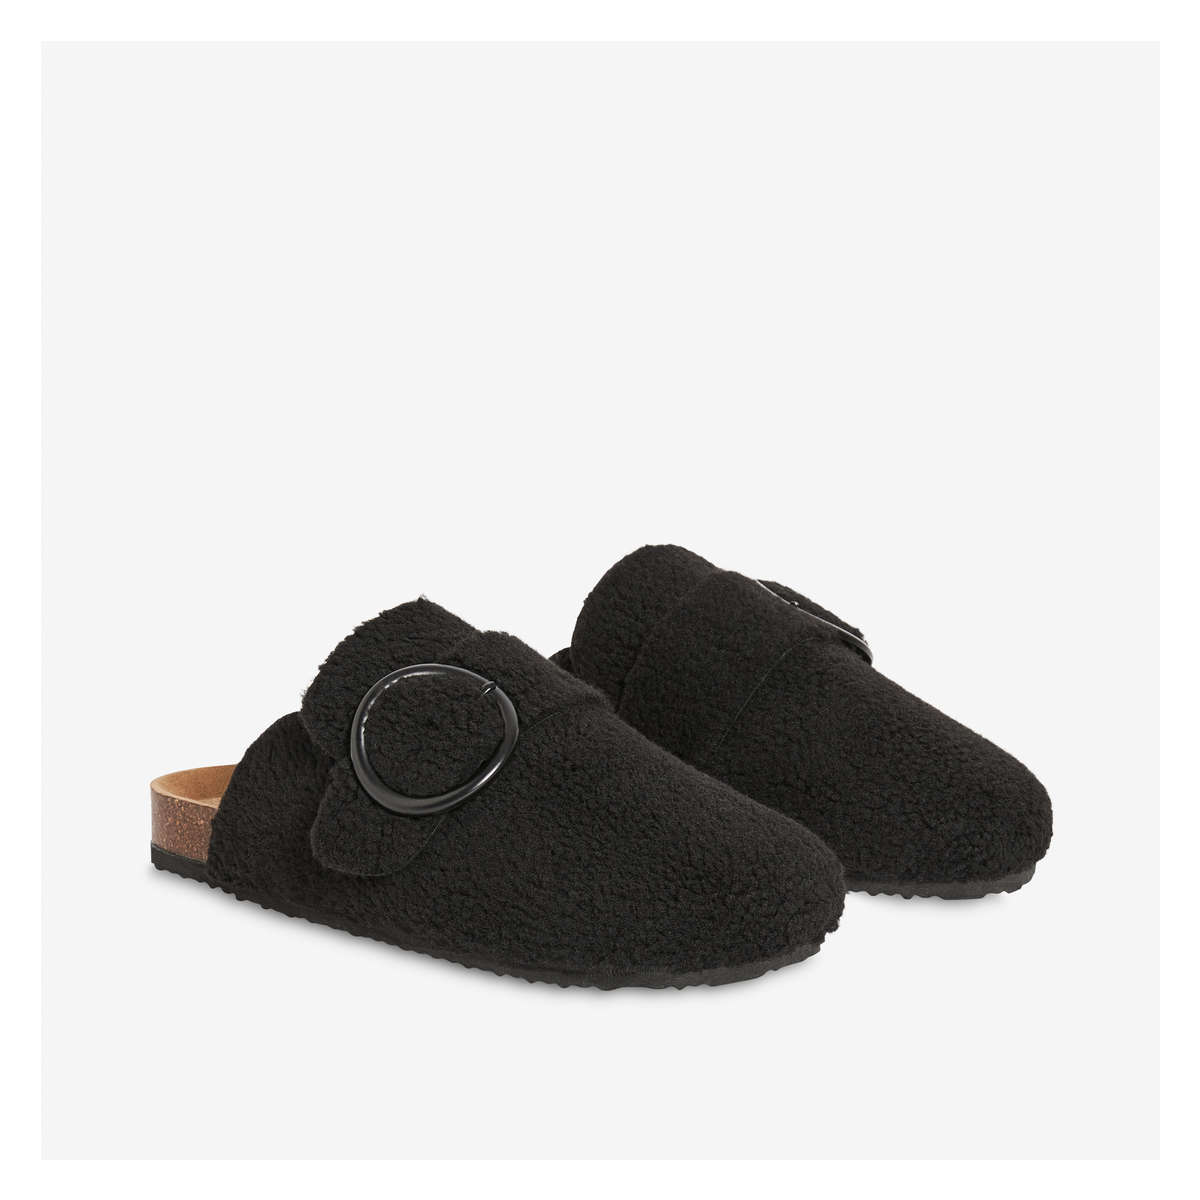 Juicy Couture Gravity Cozy Faux Fur Slippers Size 6 Color- Black - Slip On  NWT | eBay